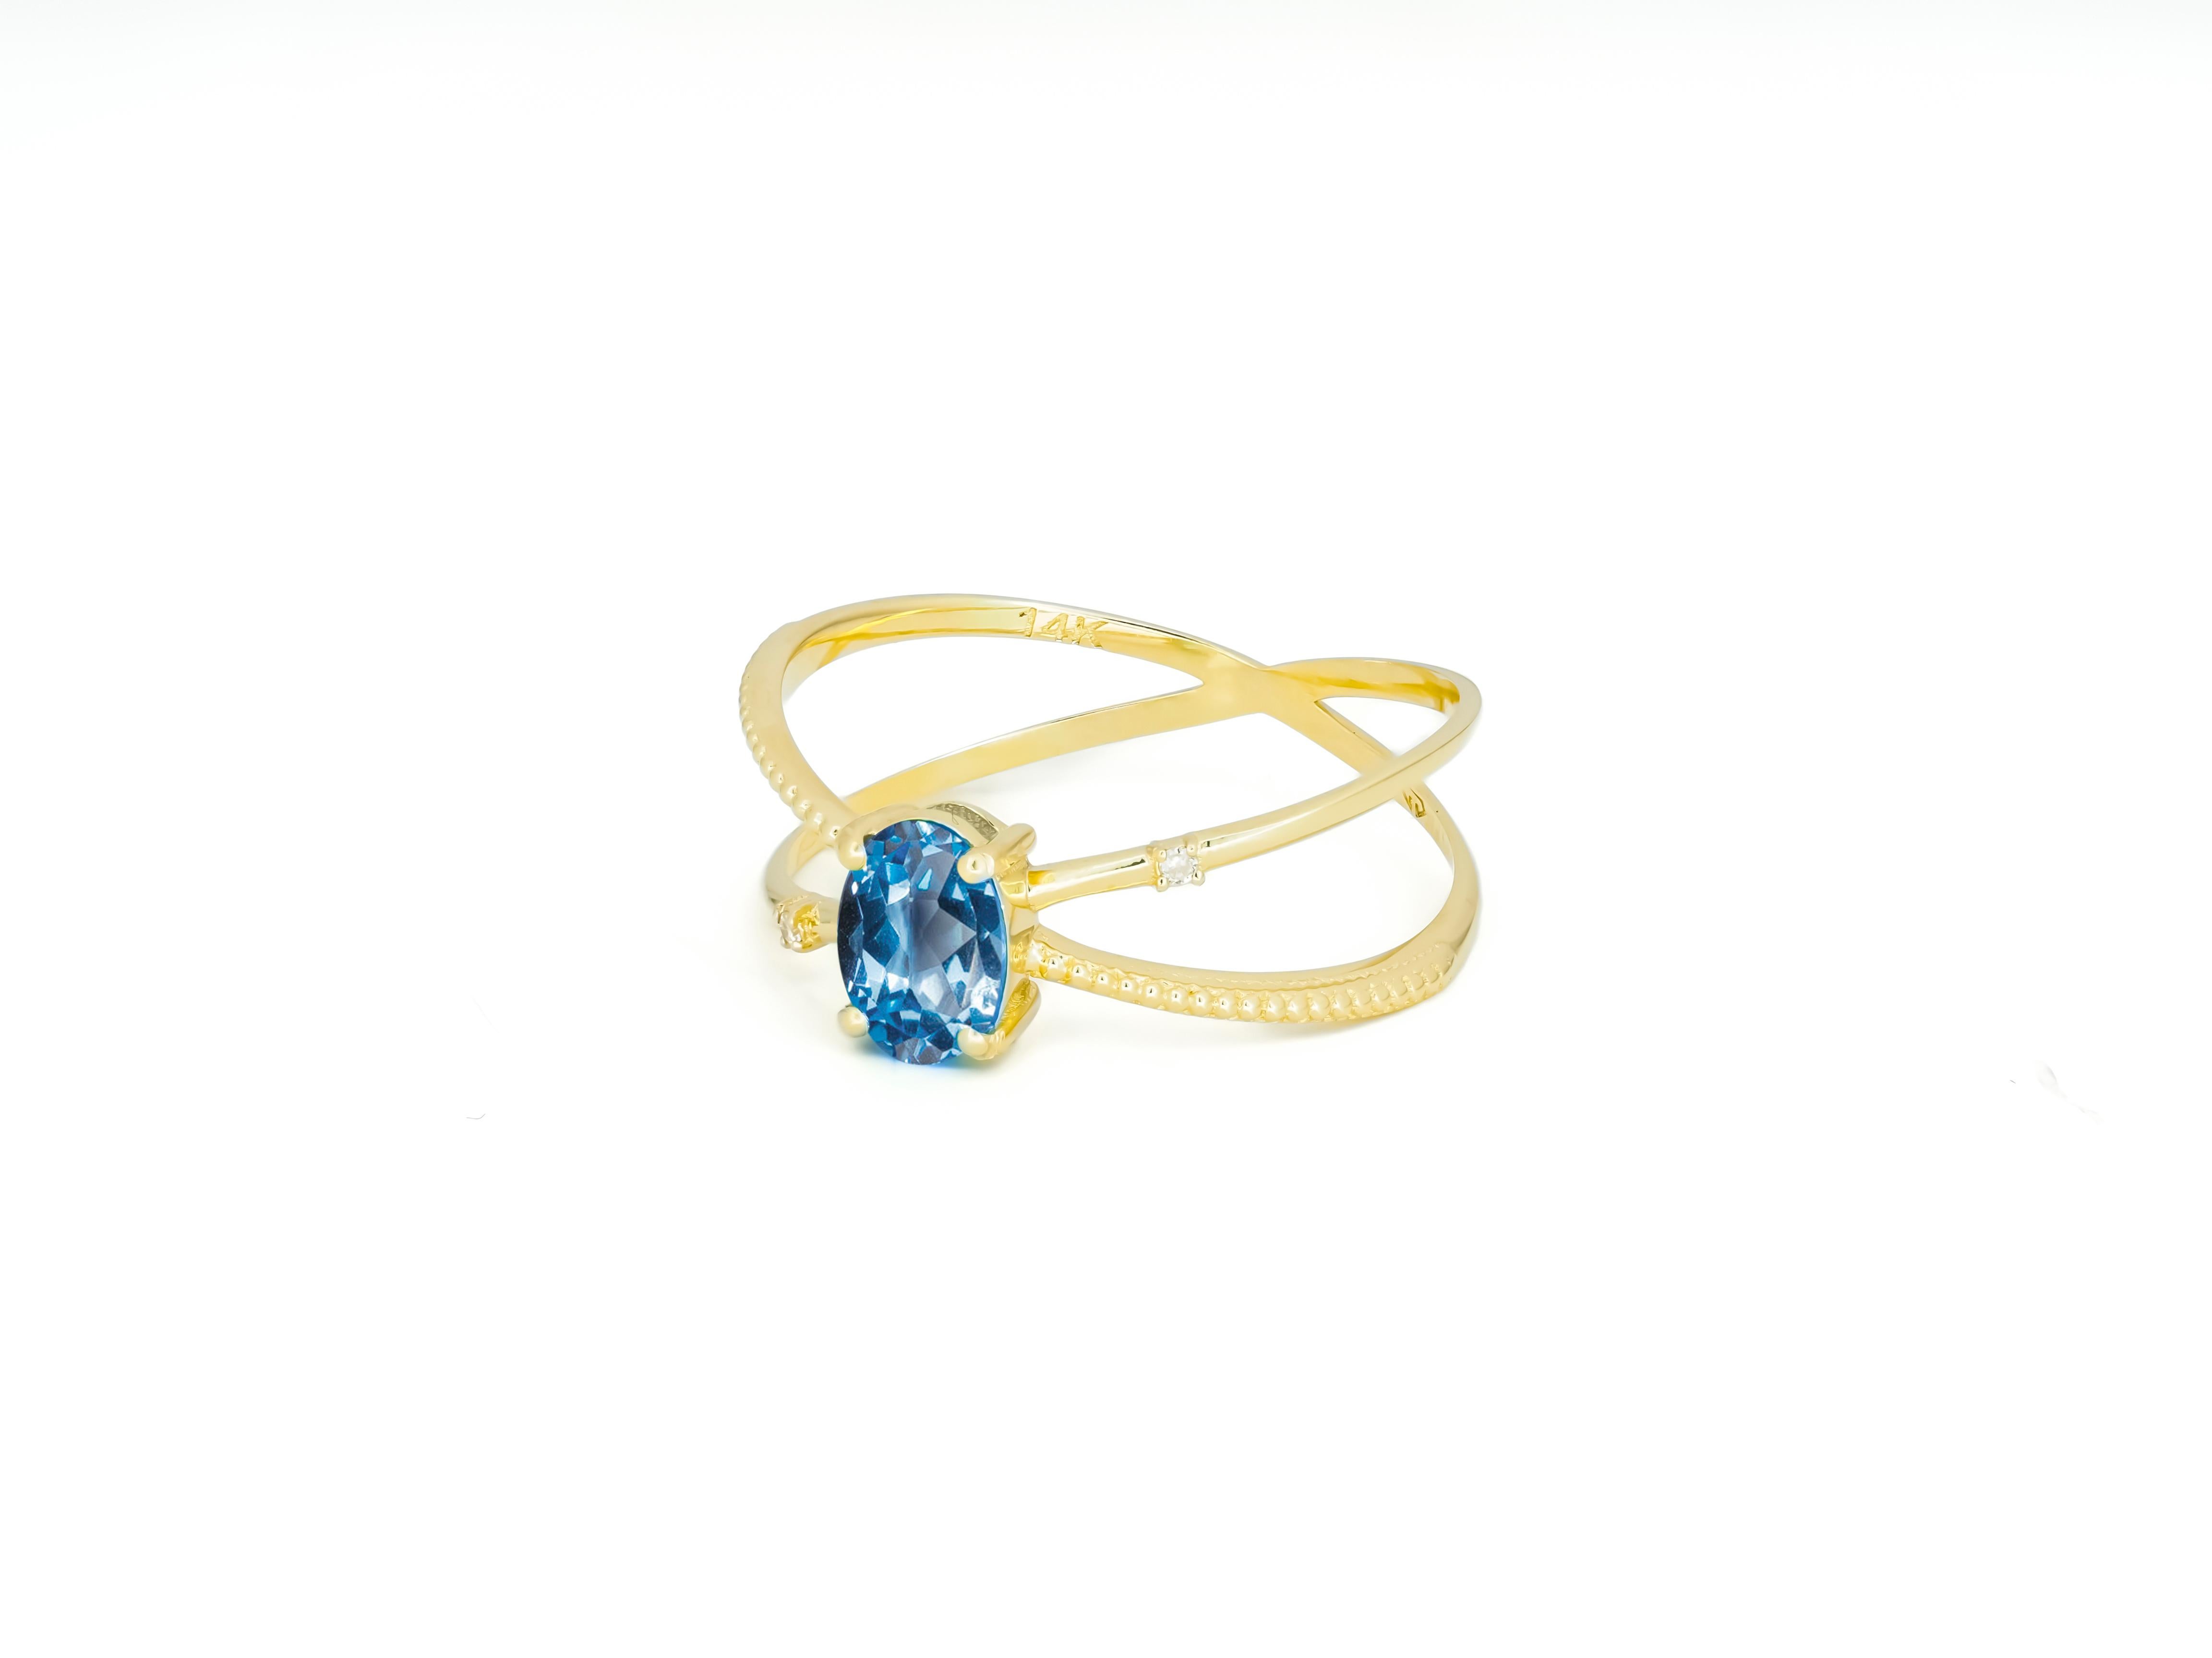 Oval Cut Topaz Spiral Ring, Oval Topaz Ring, Topaz Gold Ring, 14k Gold Ring with Topaz For Sale